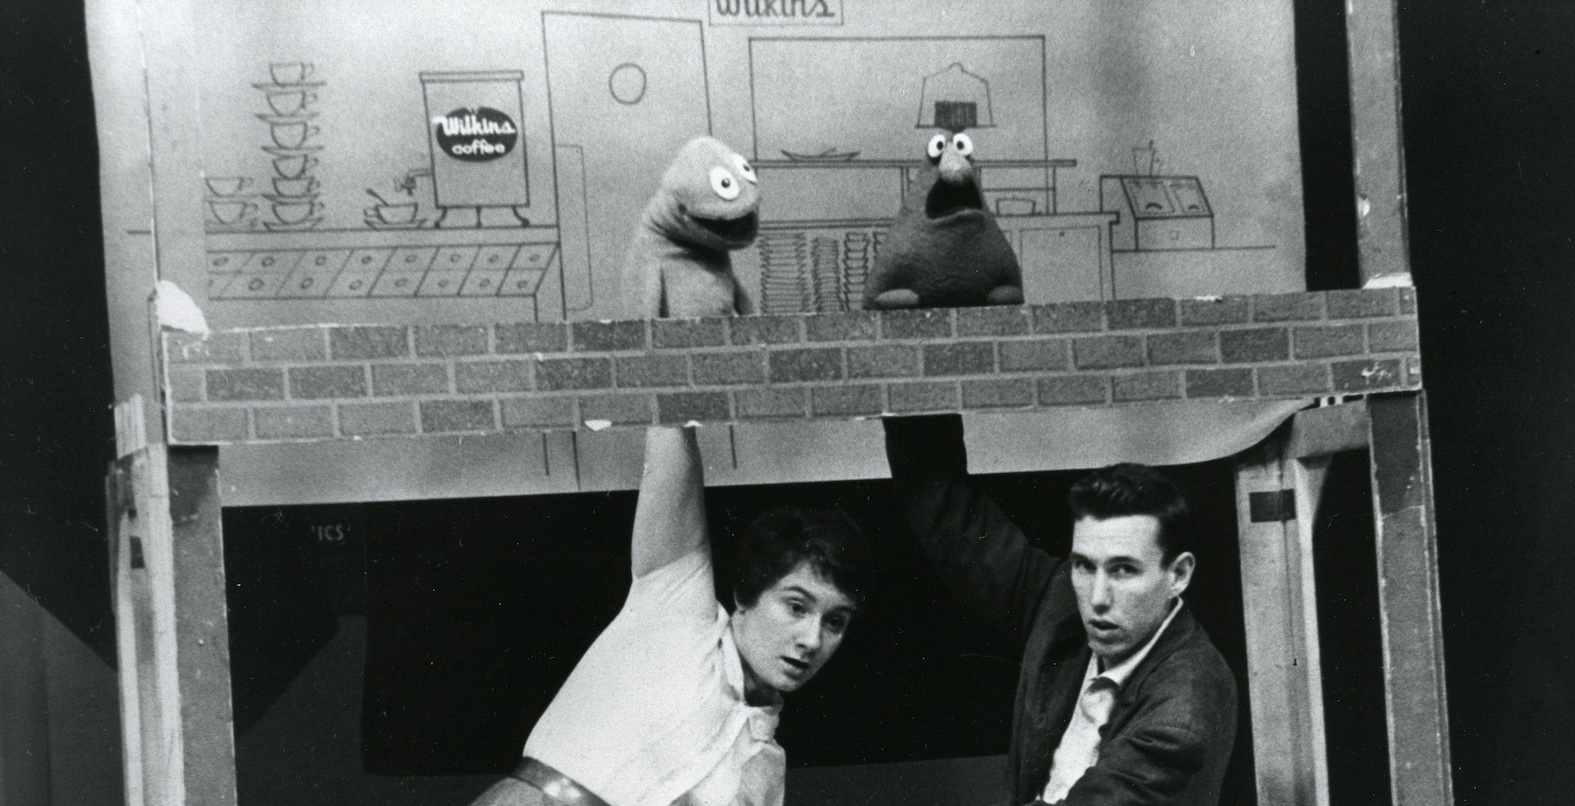 Two people crouch under a stage with their hands extended upwards holding silly looking puppets in a black and white photo from the 1950s.